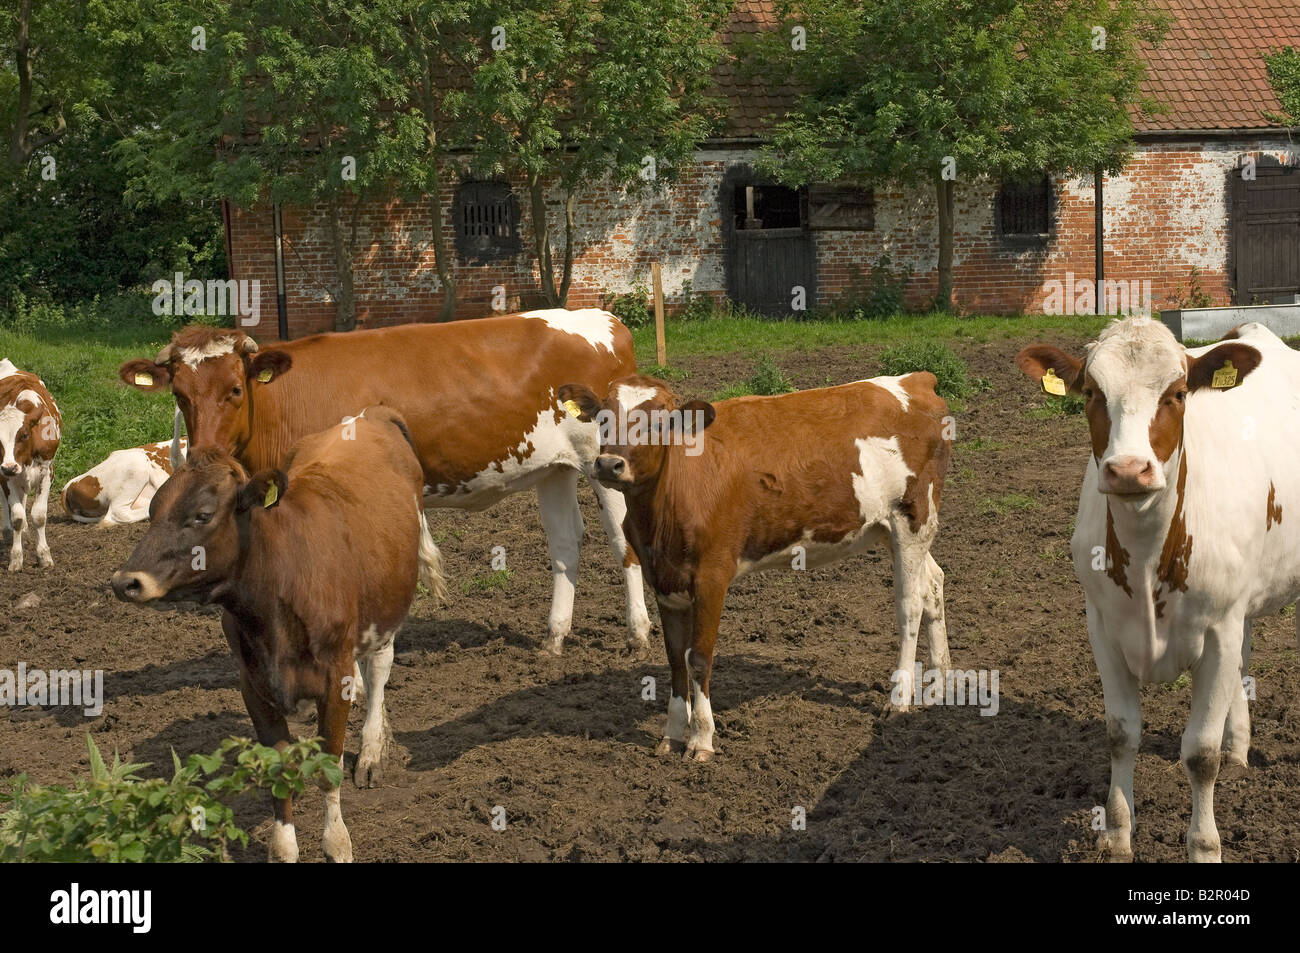 Ayrshire cattle cow cows livestock in a Farmyard Yorkshire England UK United Kingdom GB Great Britain Stock Photo